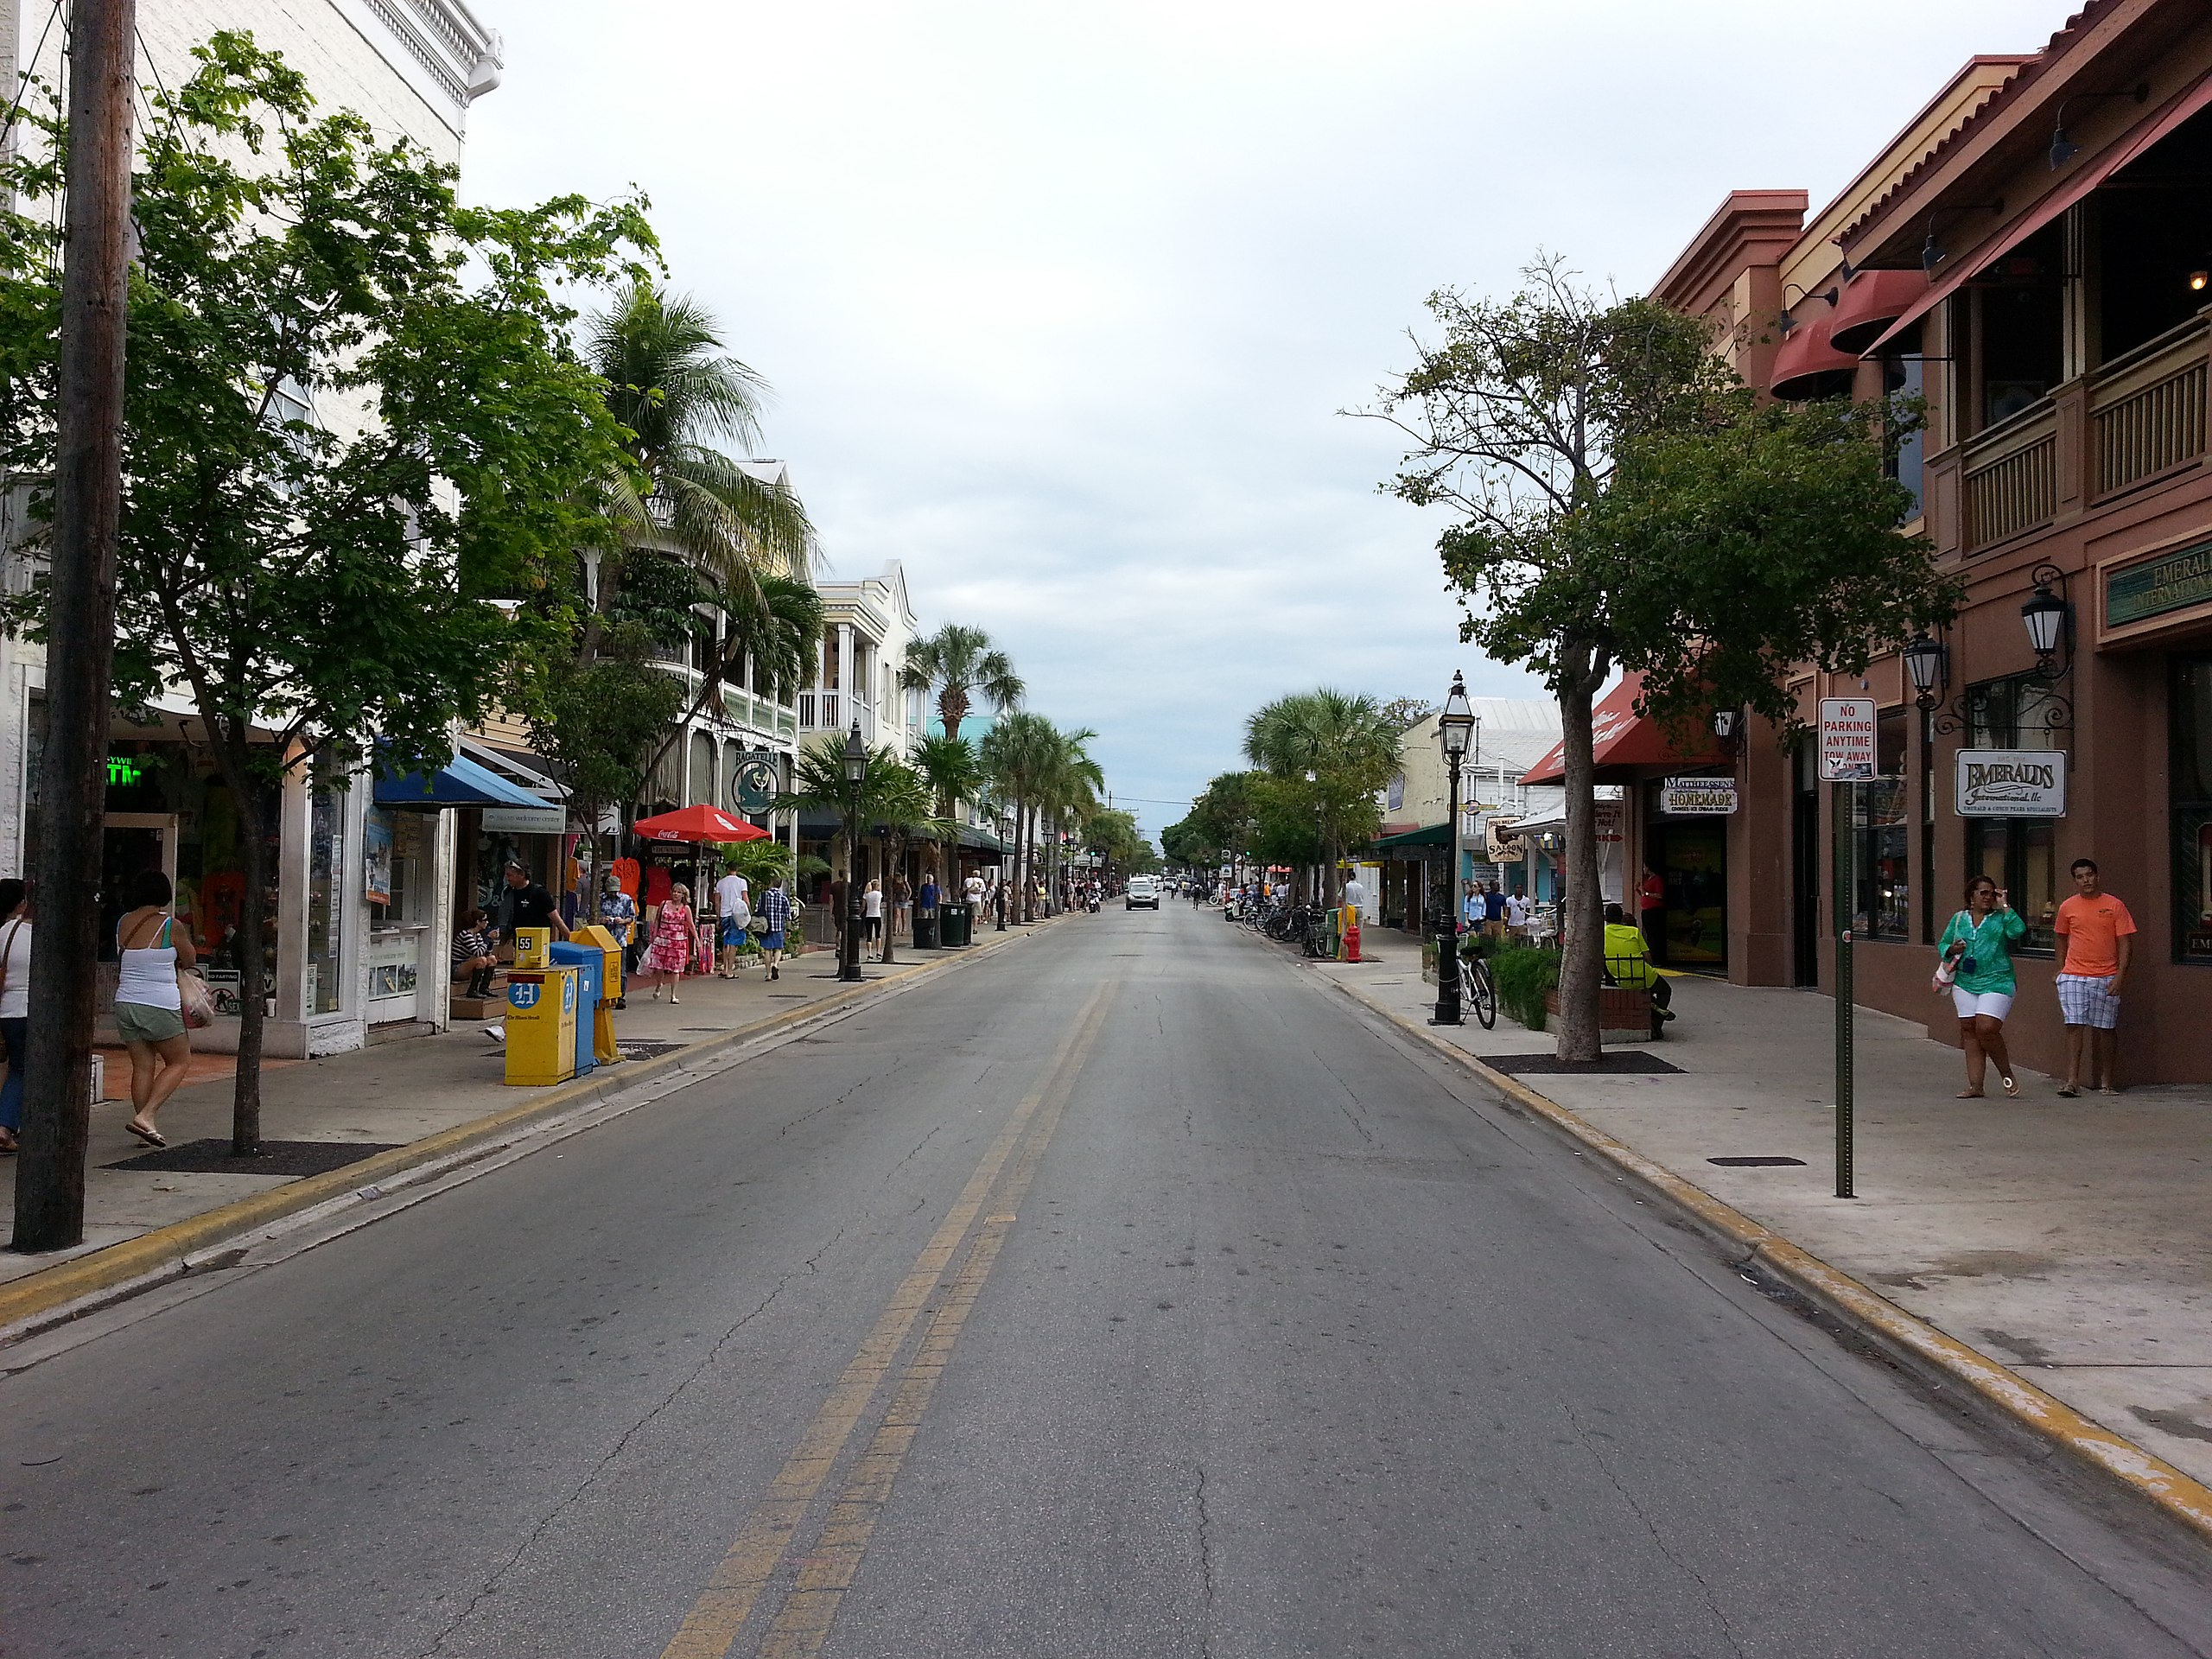 <p>Key West is a popular destination in Florida, and one of the highlights here is Duval Street. </p>  <p>Many of the shops and restaurants on Duval Street have outdoor patios and are in old buildings that have been beautifully restored.</p>